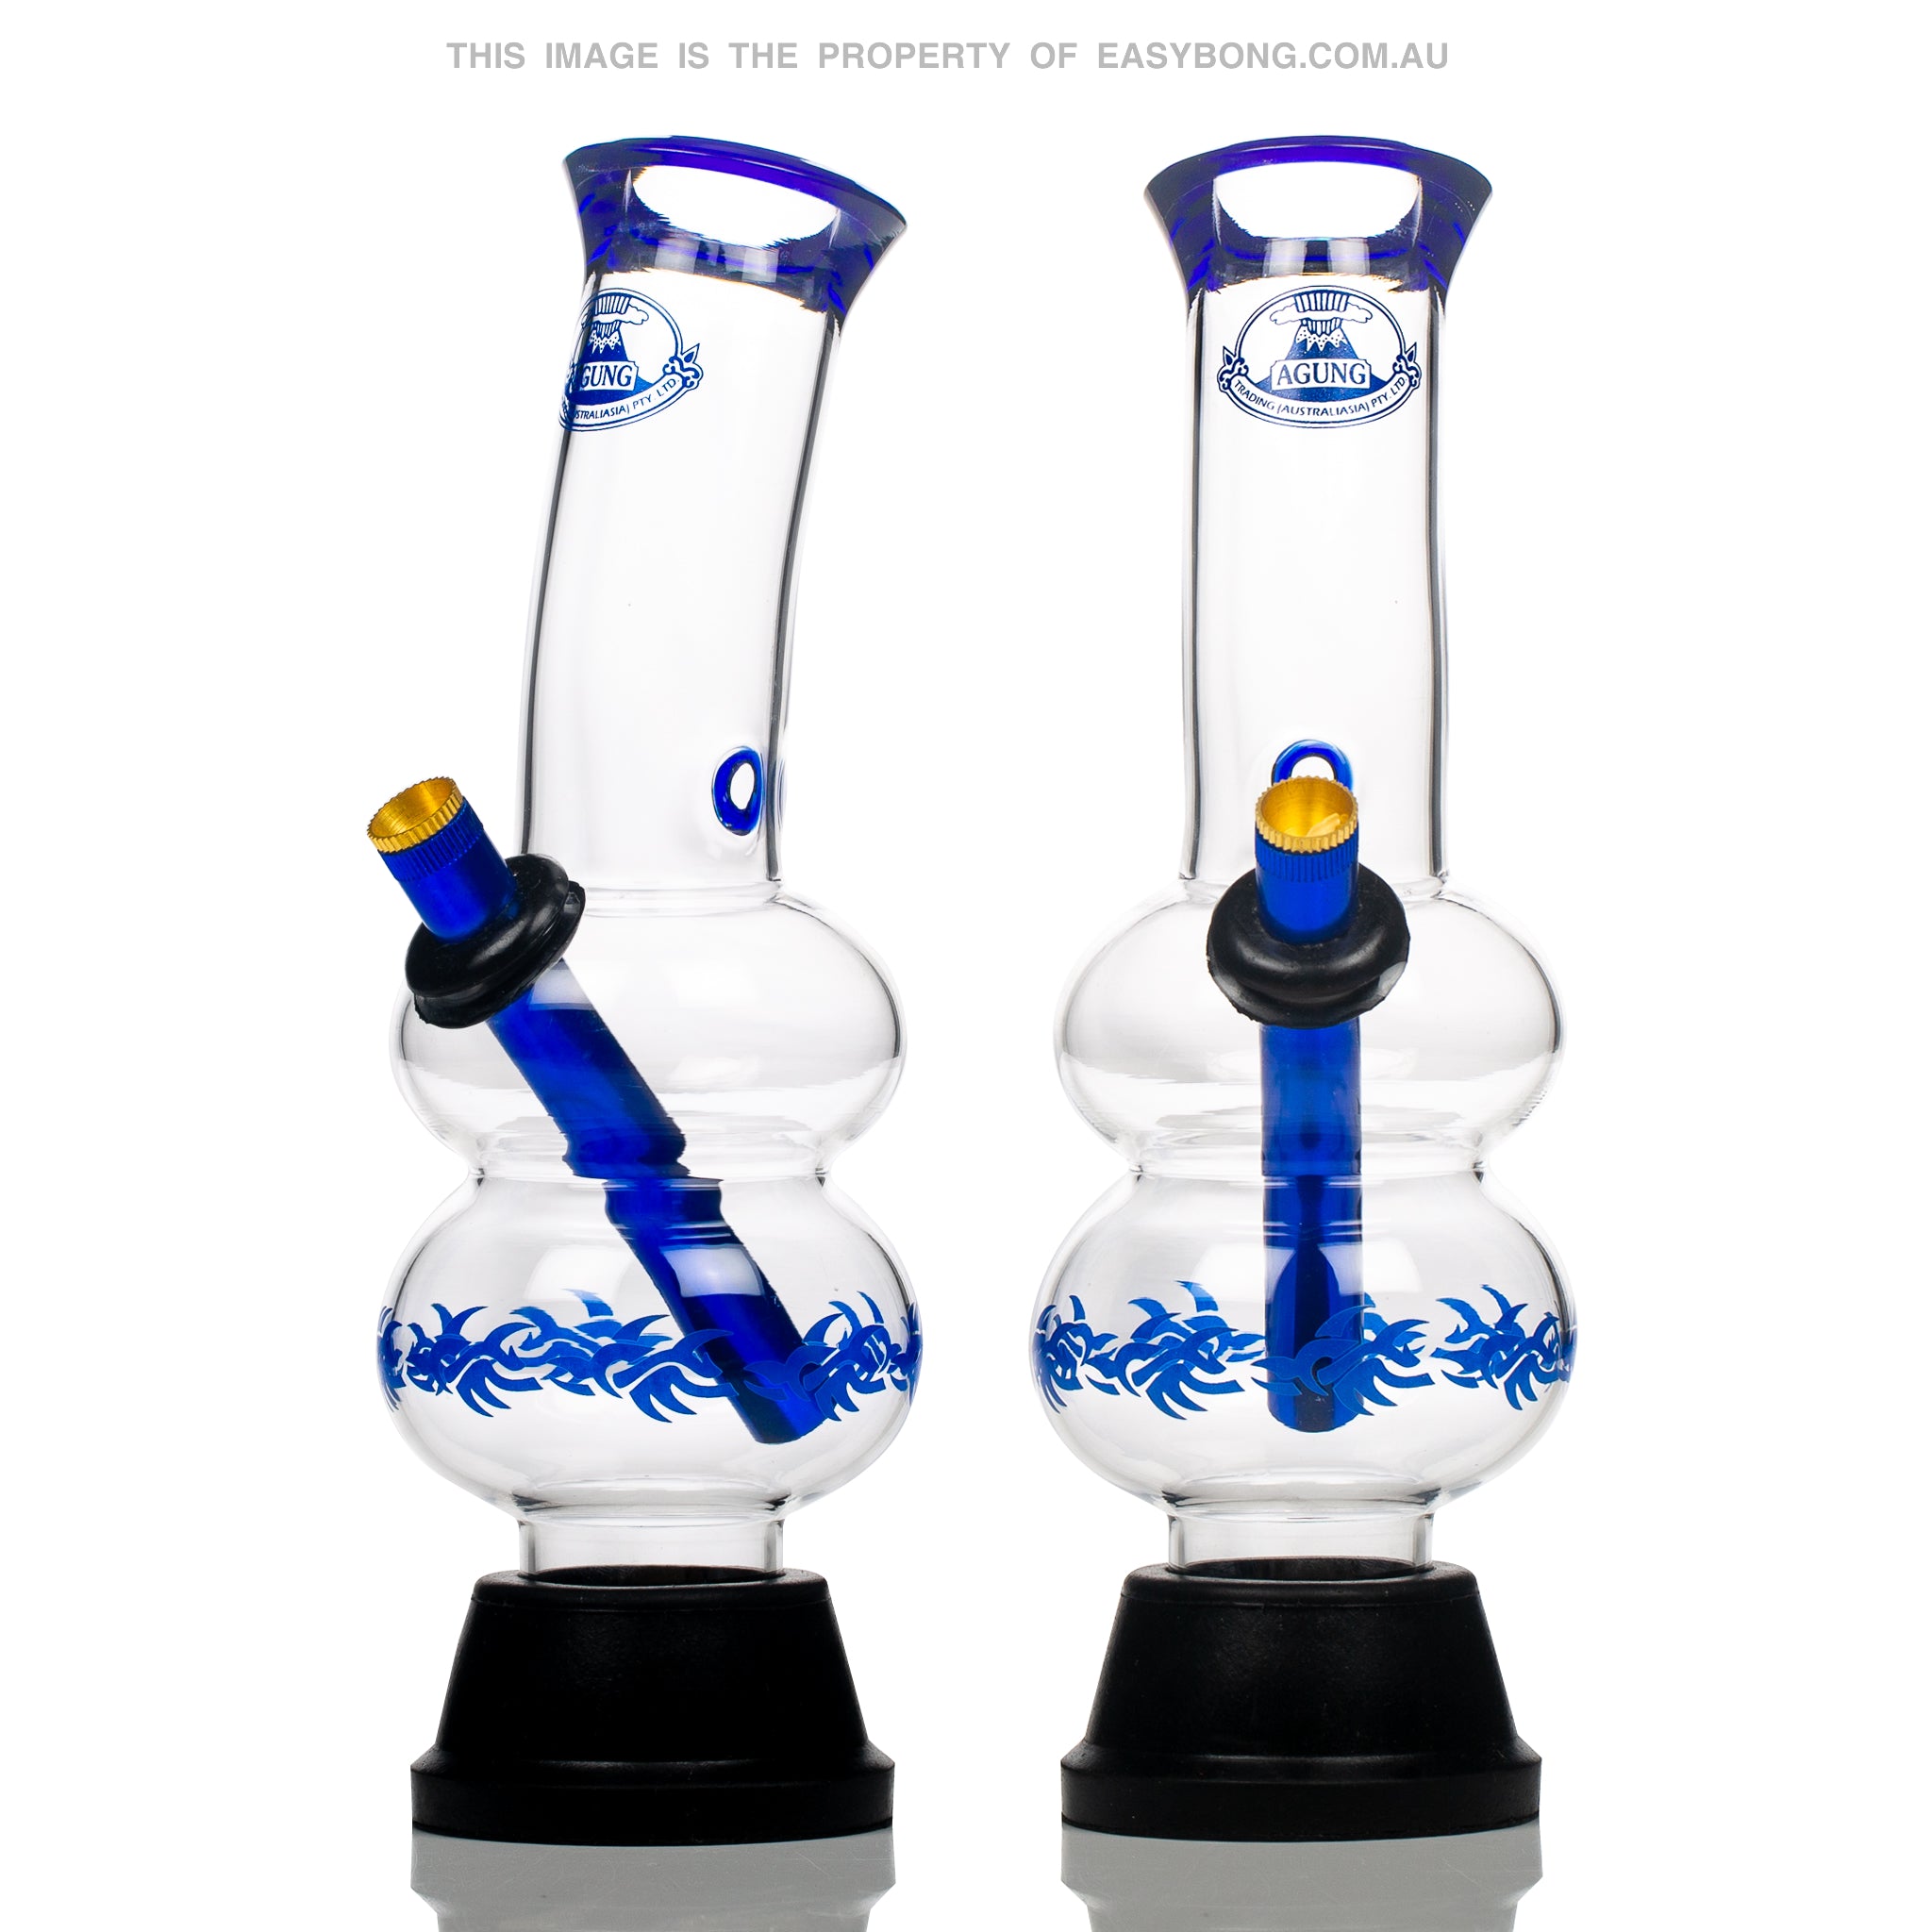 26cm tall Agung Aussie style pyrex glass bong with blue accents.